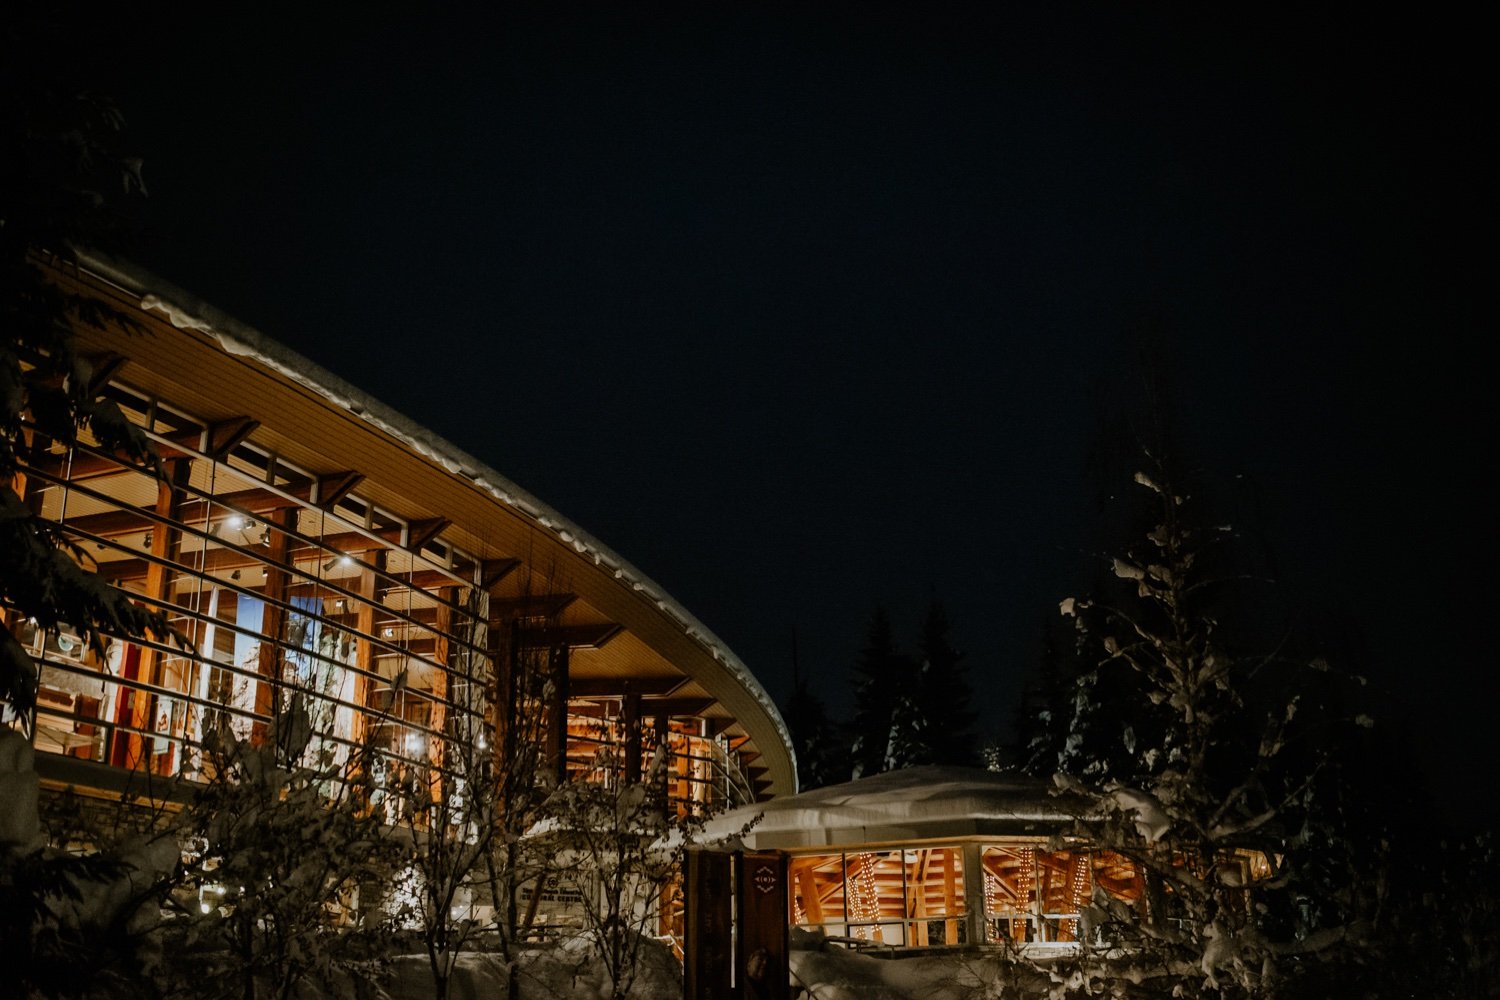 Squamish Lil’wat Cultural Centre at night in the snow